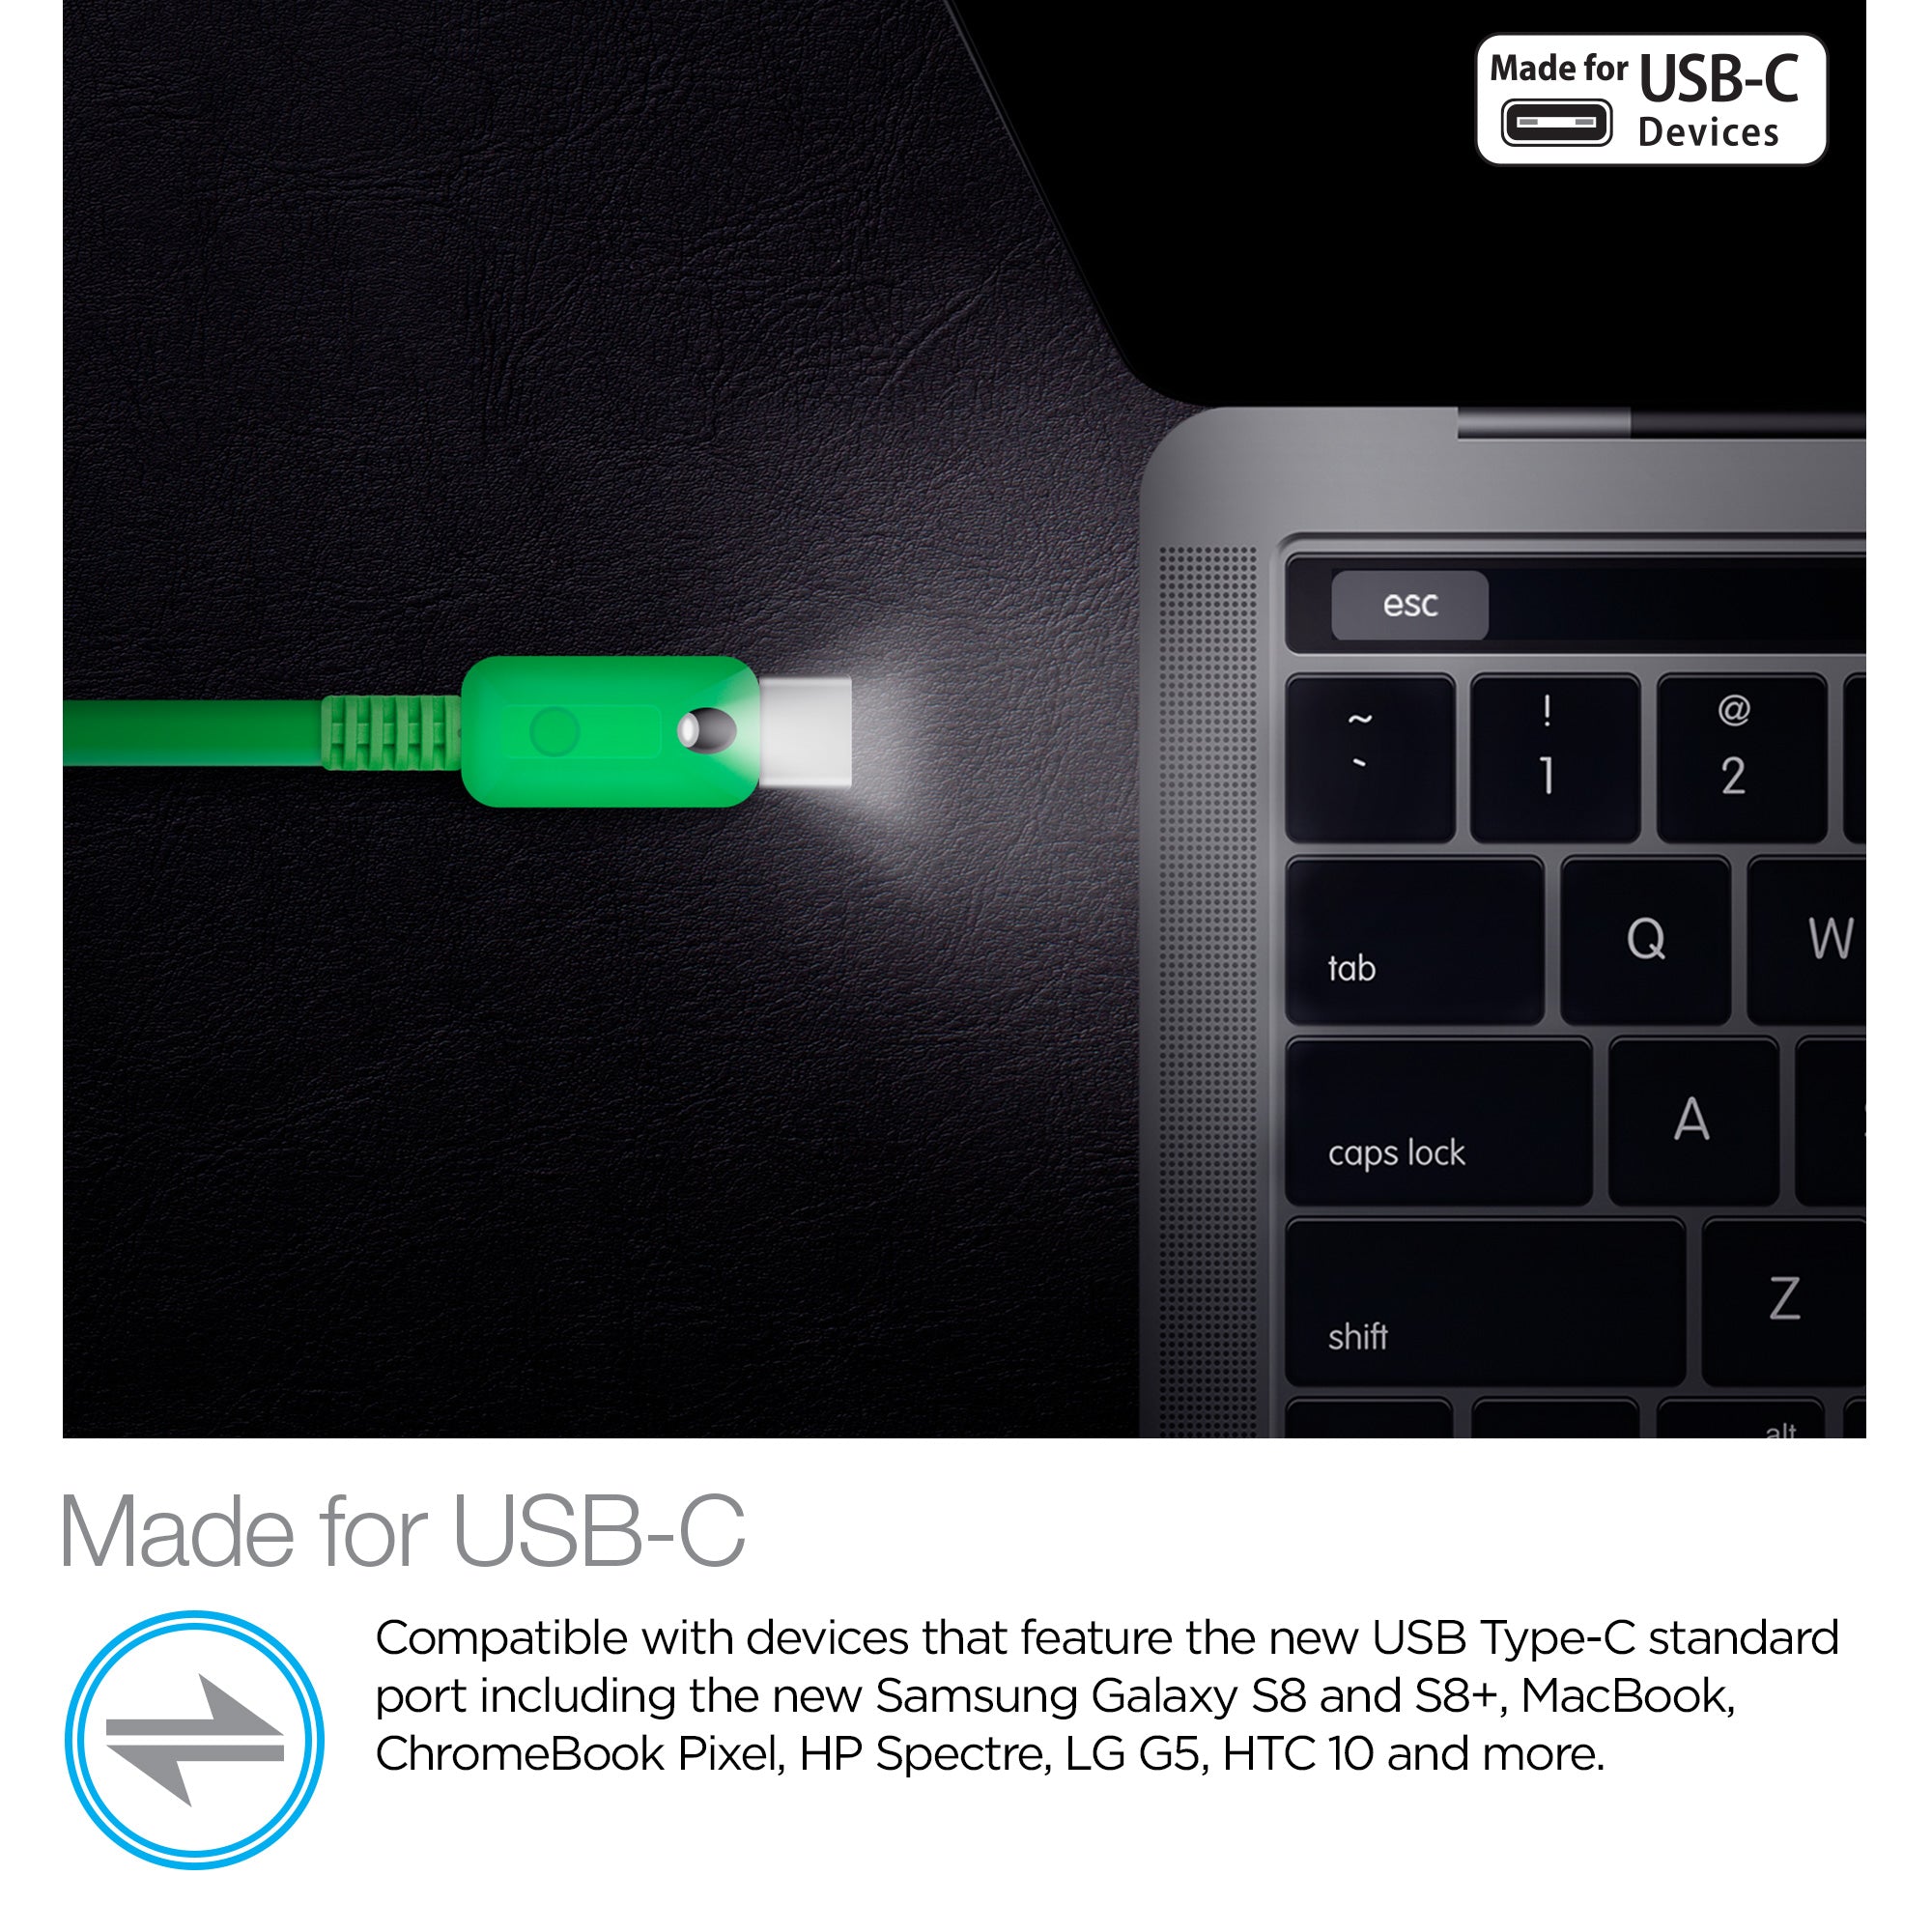 Lighted USB to USB-C Flat Cable | 6ft | Green